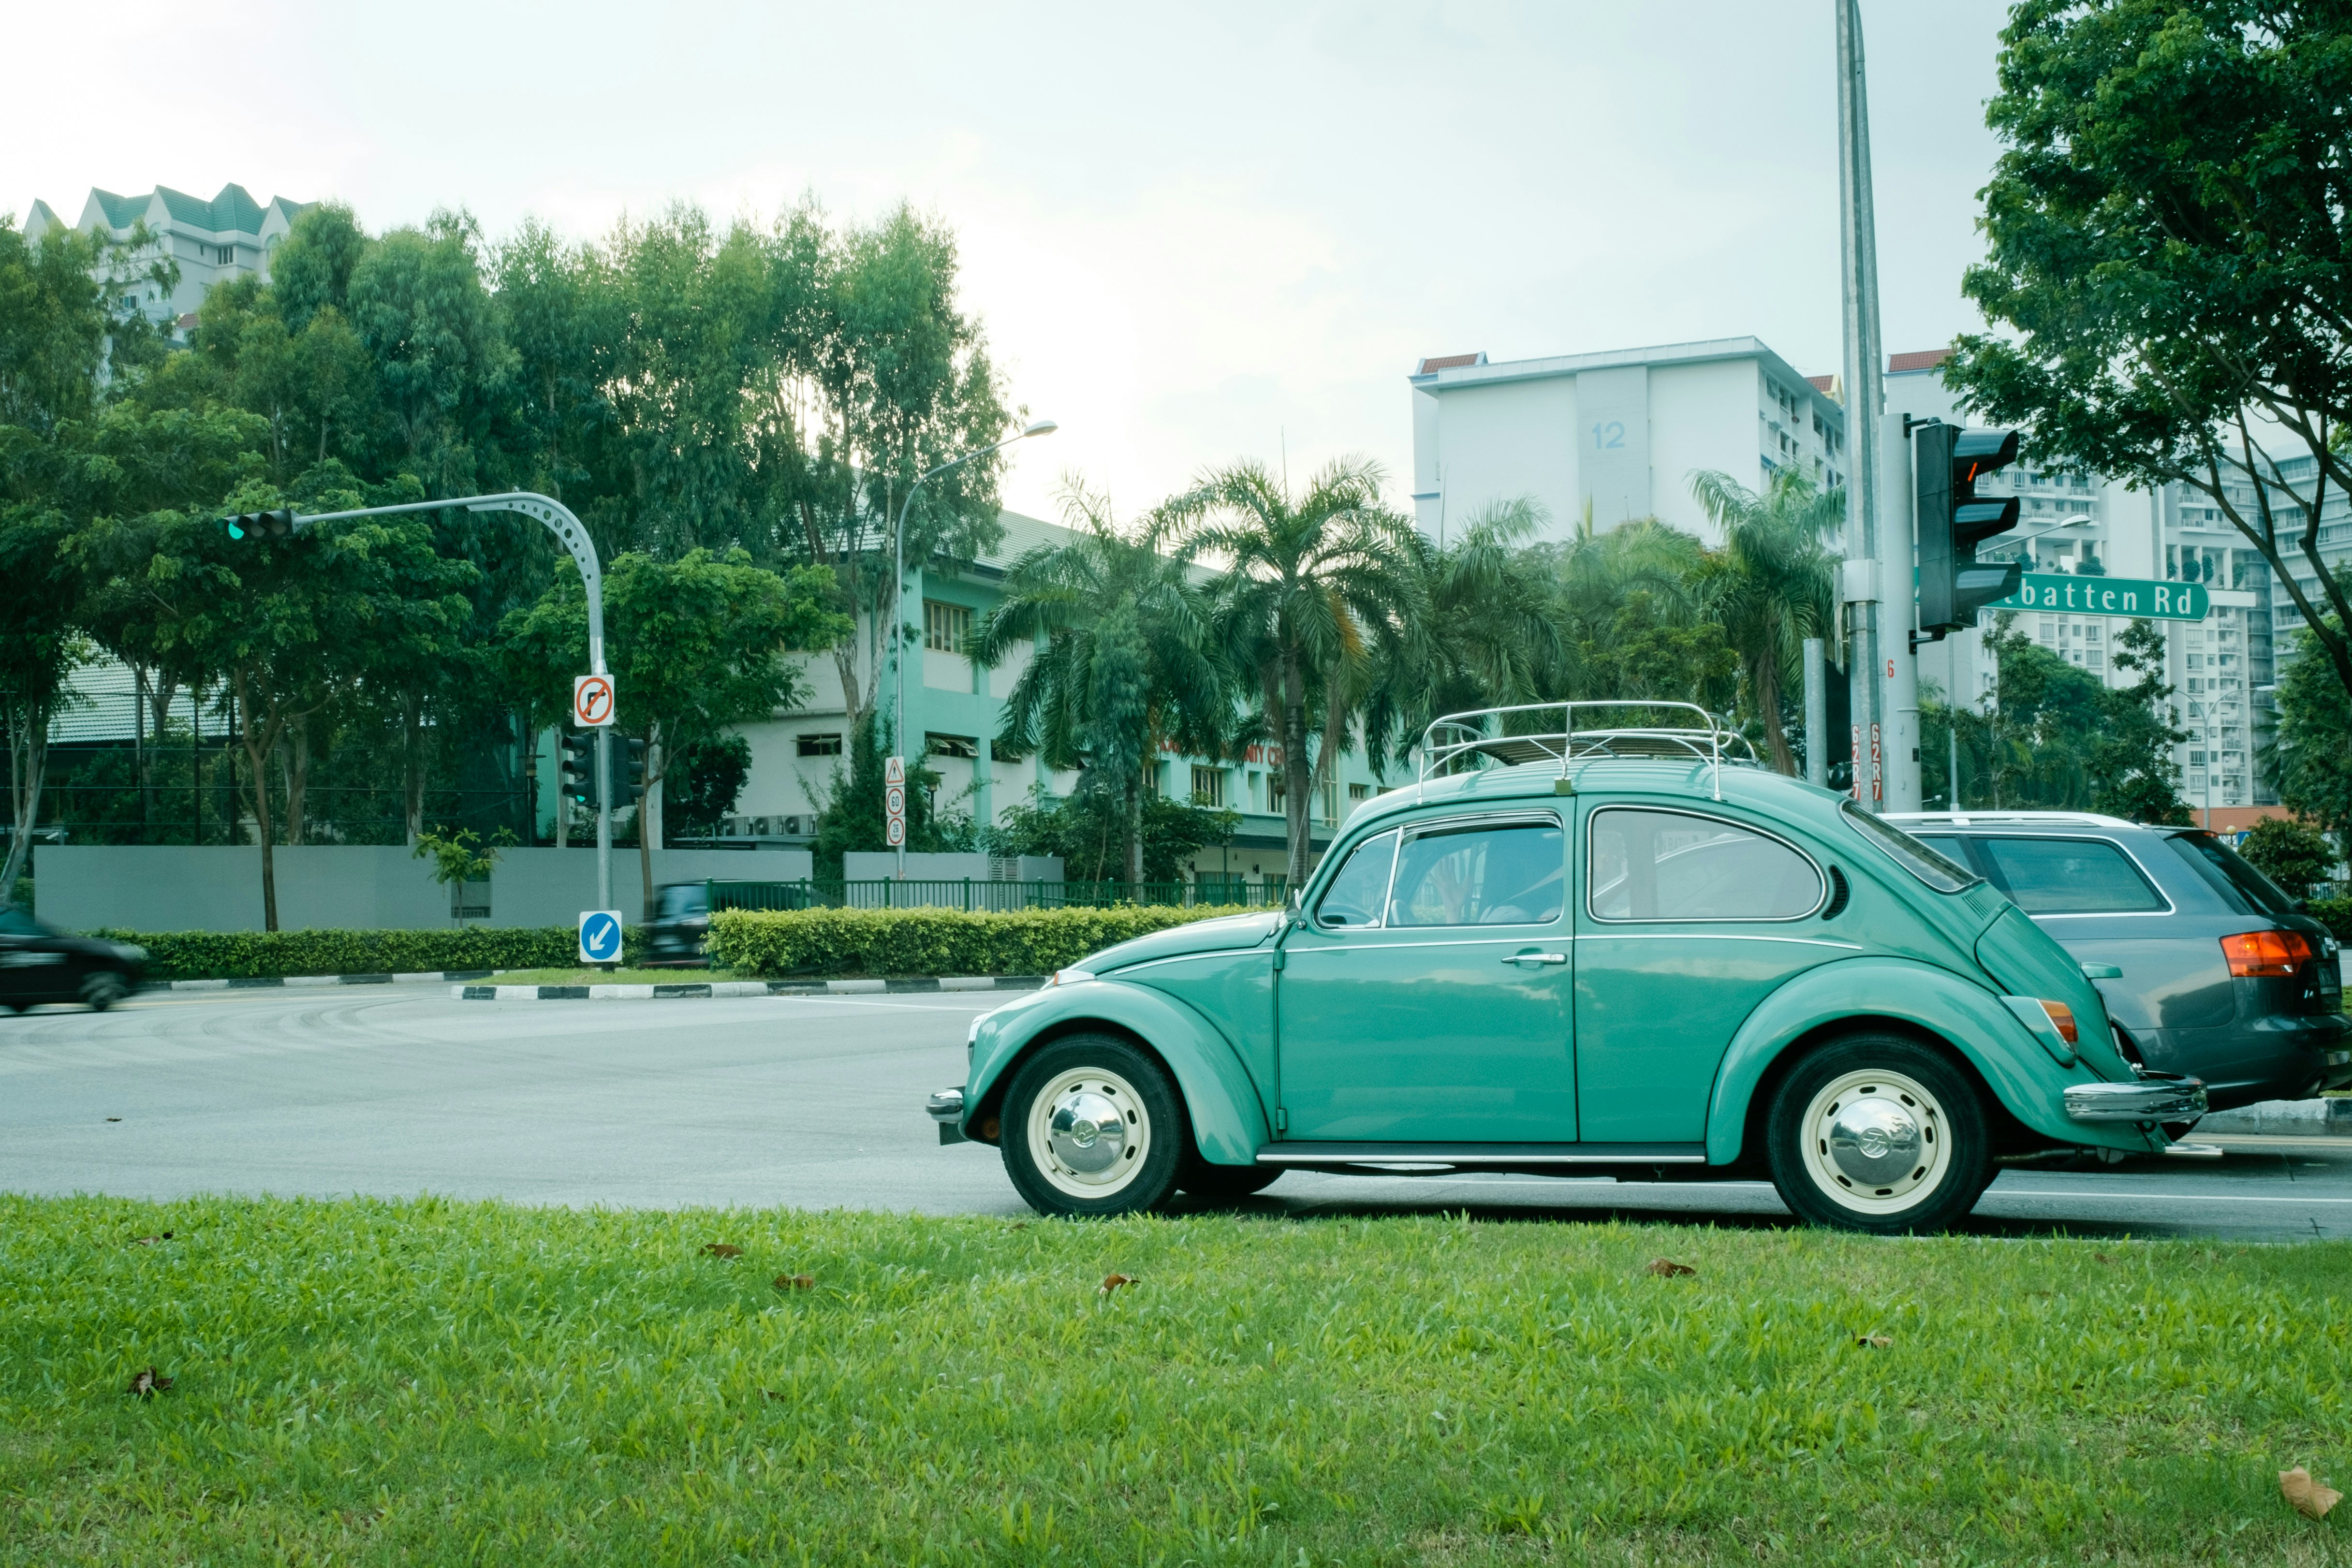 teal Volkswagen beetle parked on gray concrete road during daytime